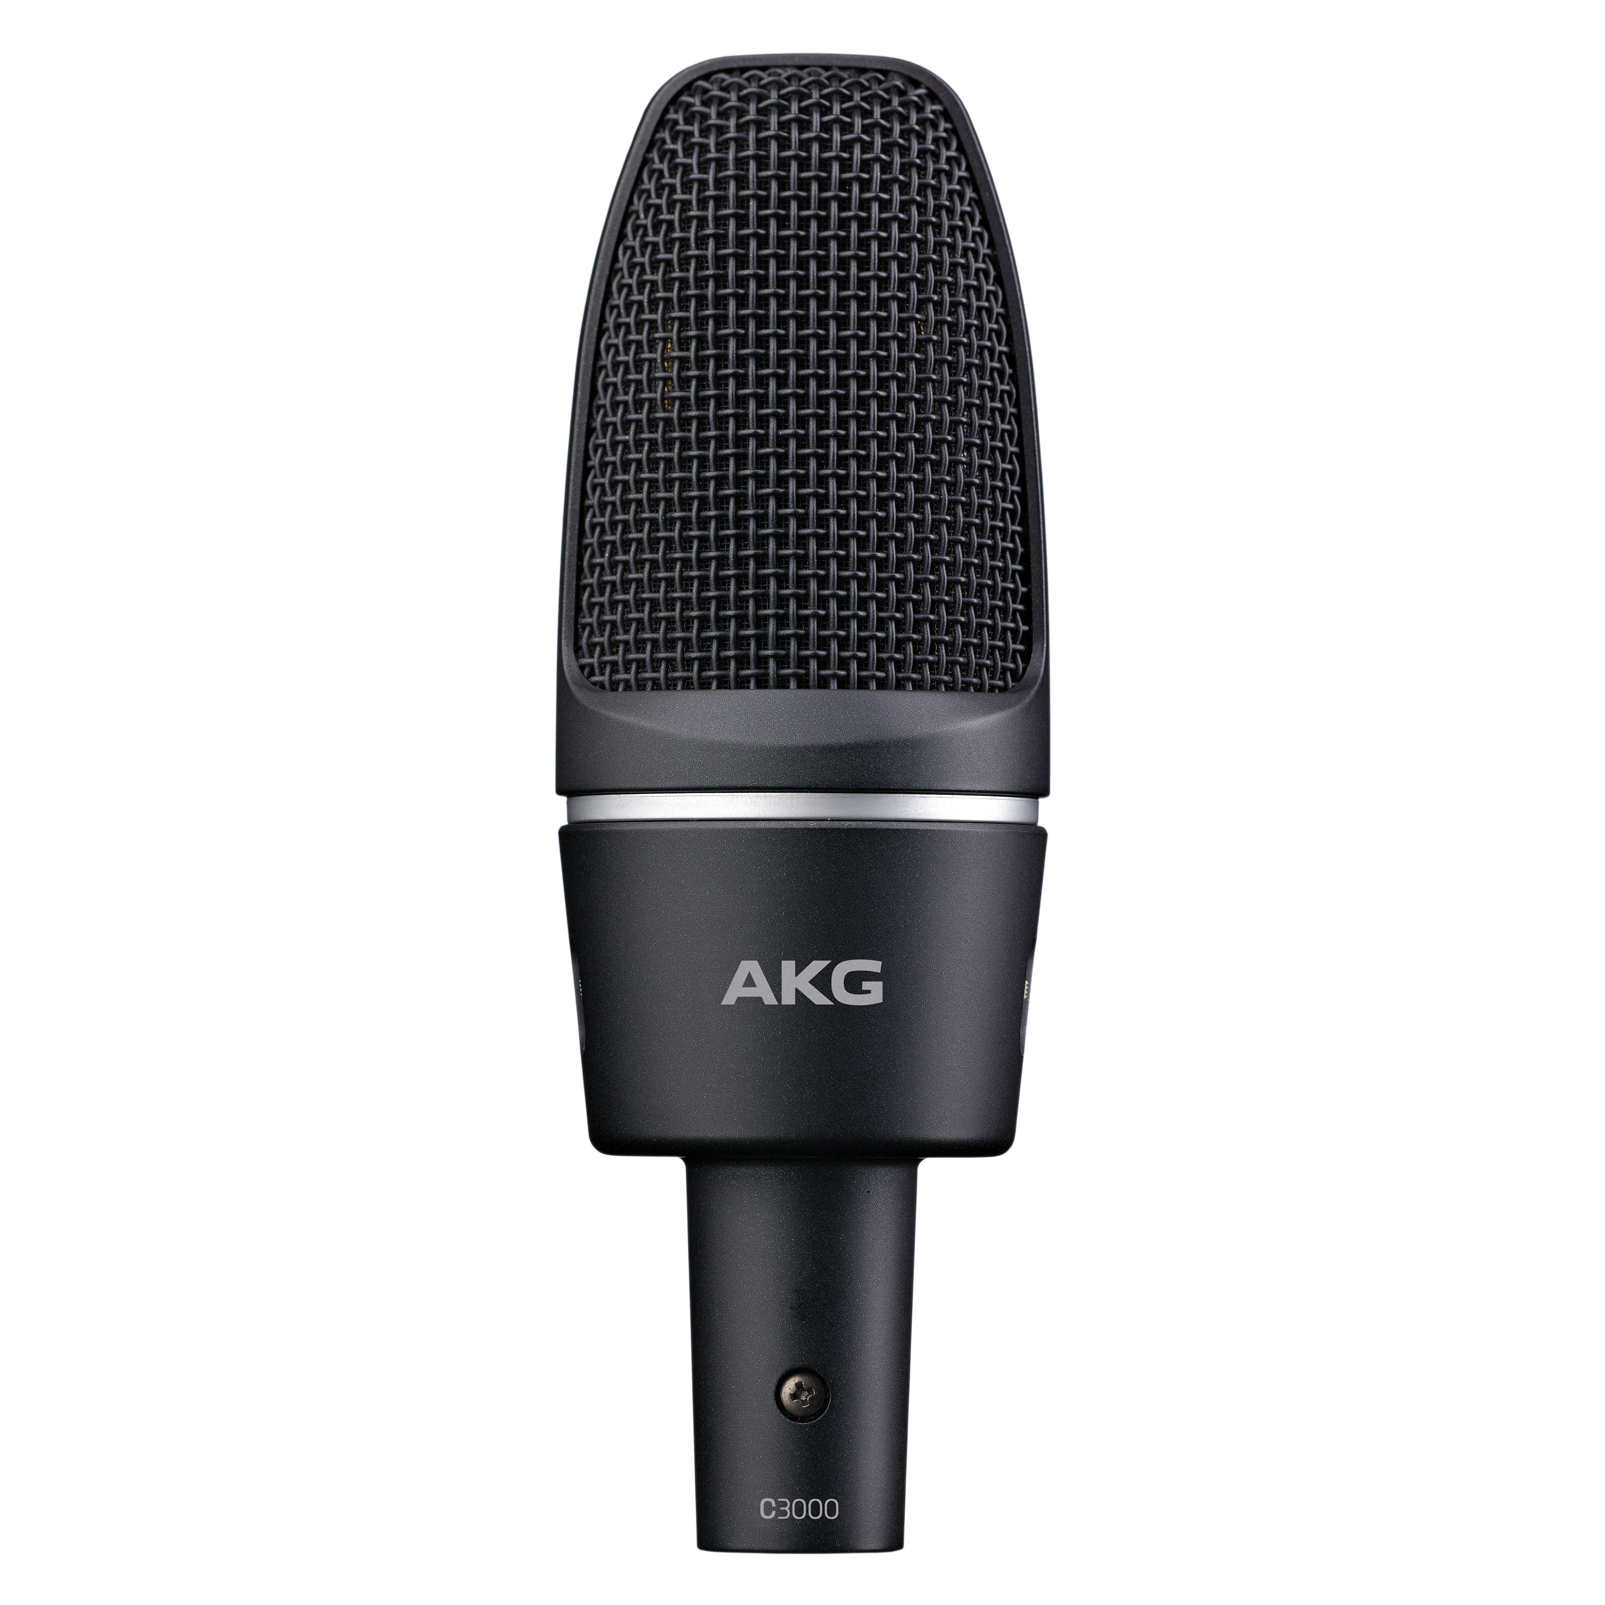 AKG_c3000_front_white.png (1.35 MB)